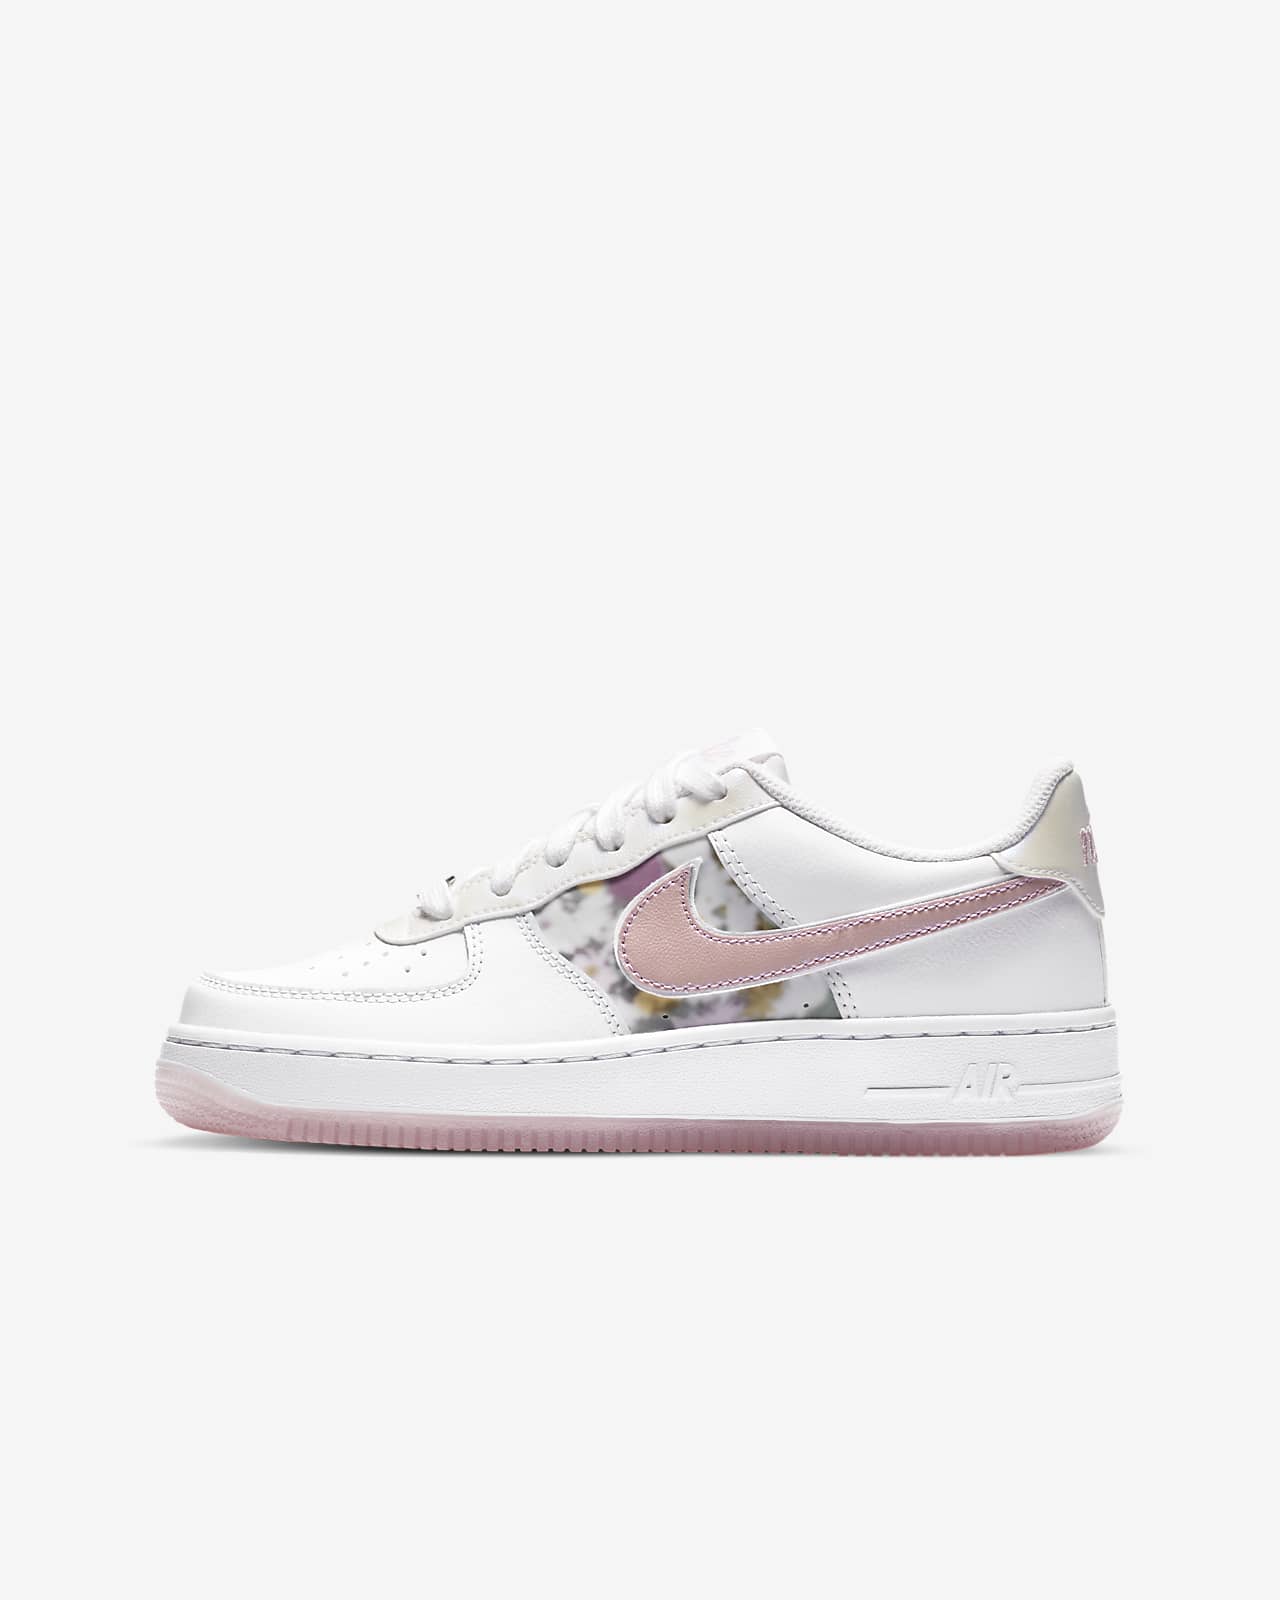 nike air force 1 youth 6.5